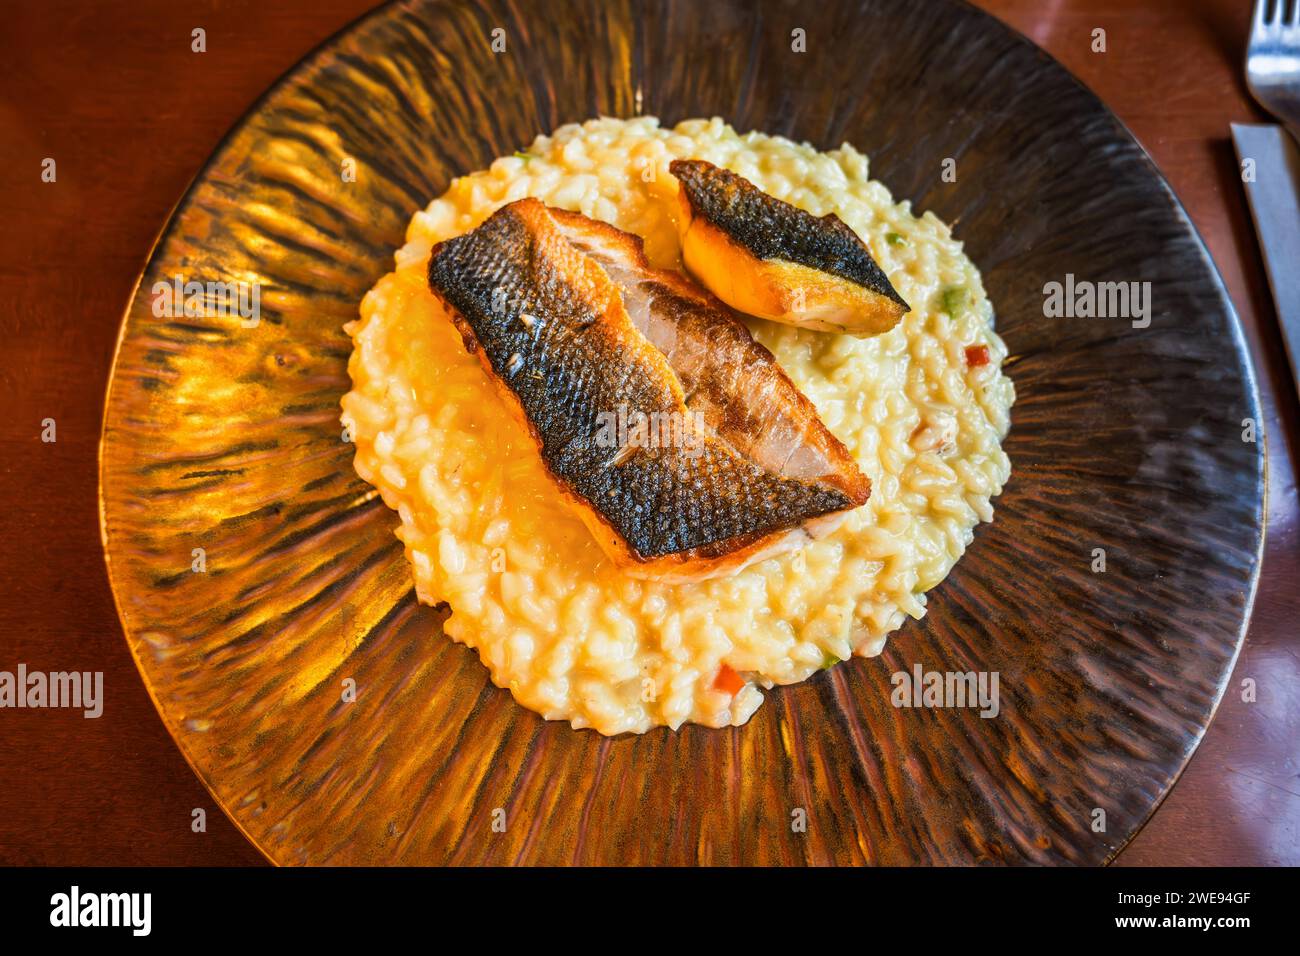 Roasted fish fillet (sea bass) on risotto with vegetable on decorative plate on restaurant table, closeup. Stock Photo